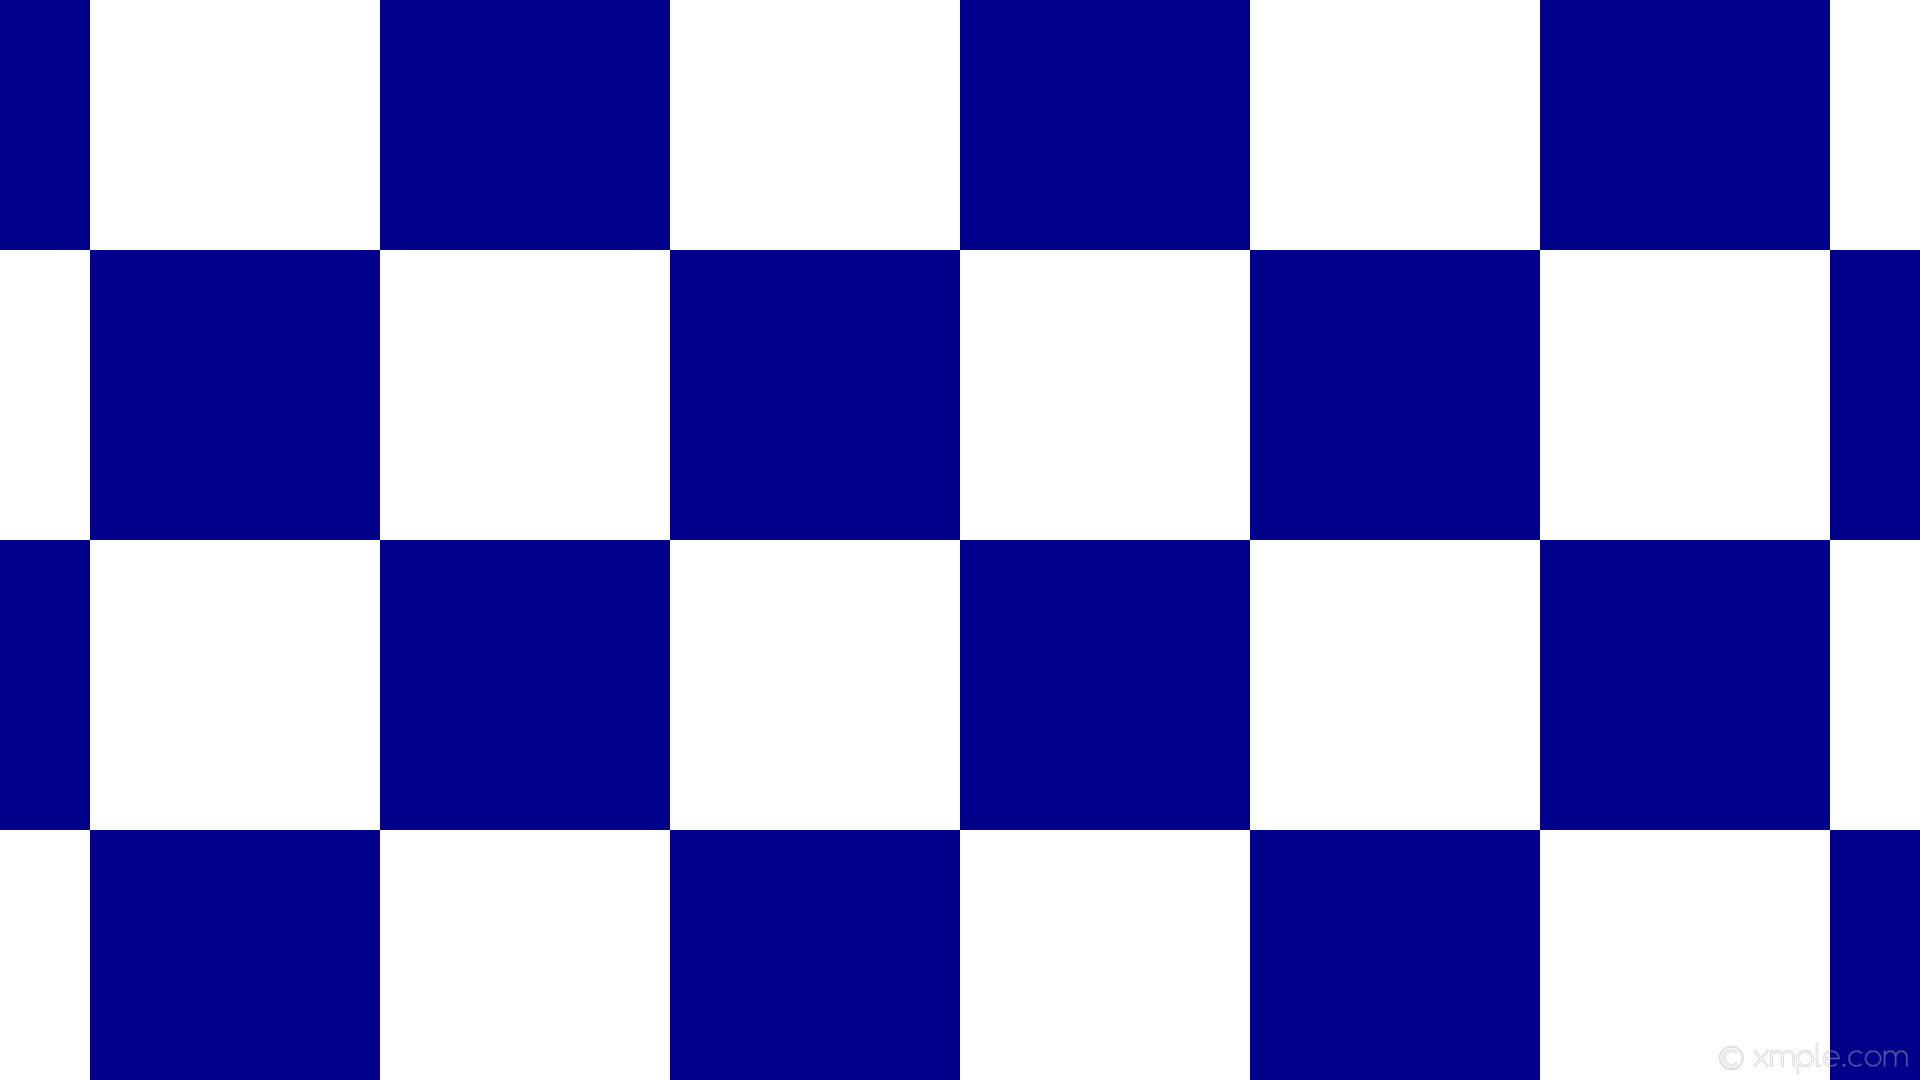 1920x1080 Checkered Wallpaper | Recettear Wiki | FANDOM powered by Wikia Â· Blue and  White Checkered Wallpaper - WallpaperSafari